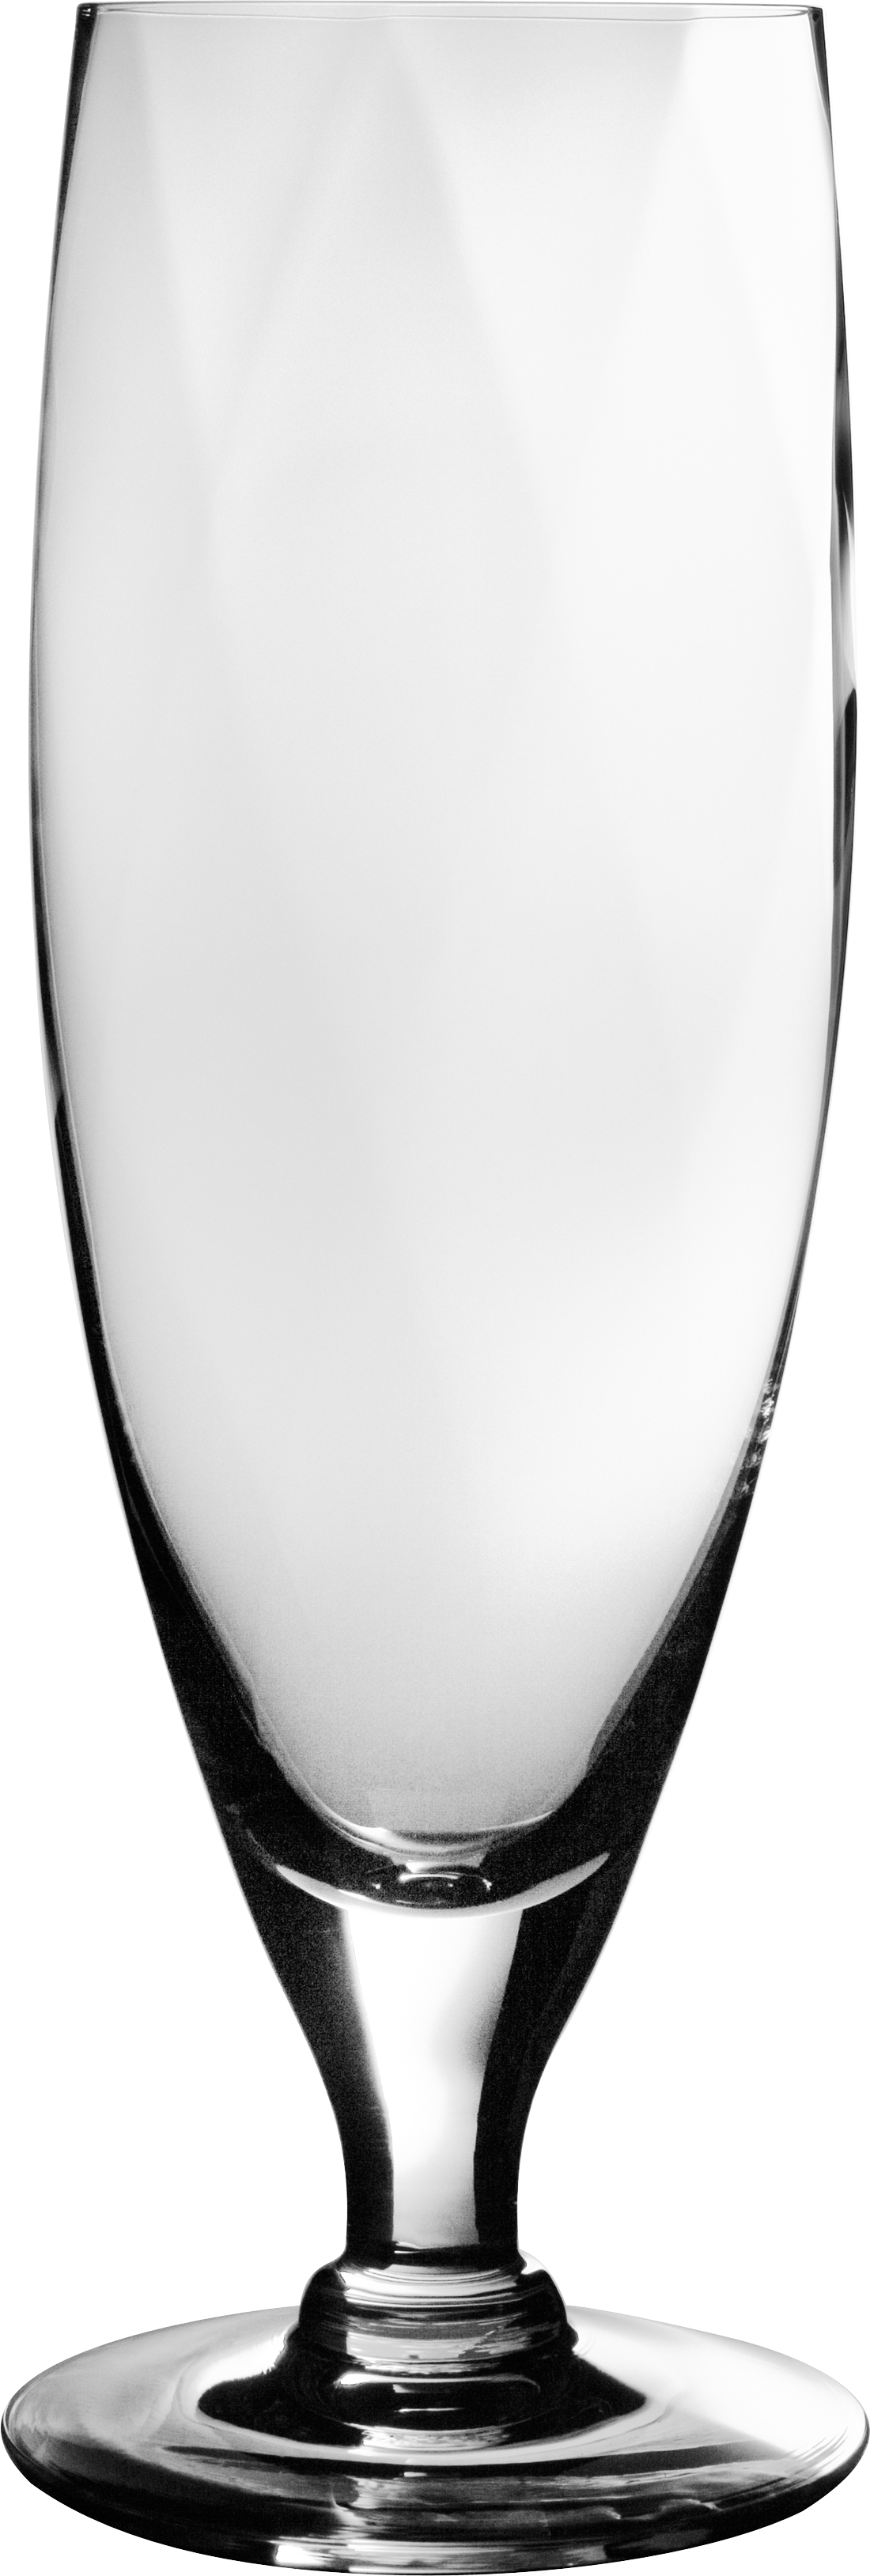 Free Glass Png Transparent, Download Free Glass Png Transparent png